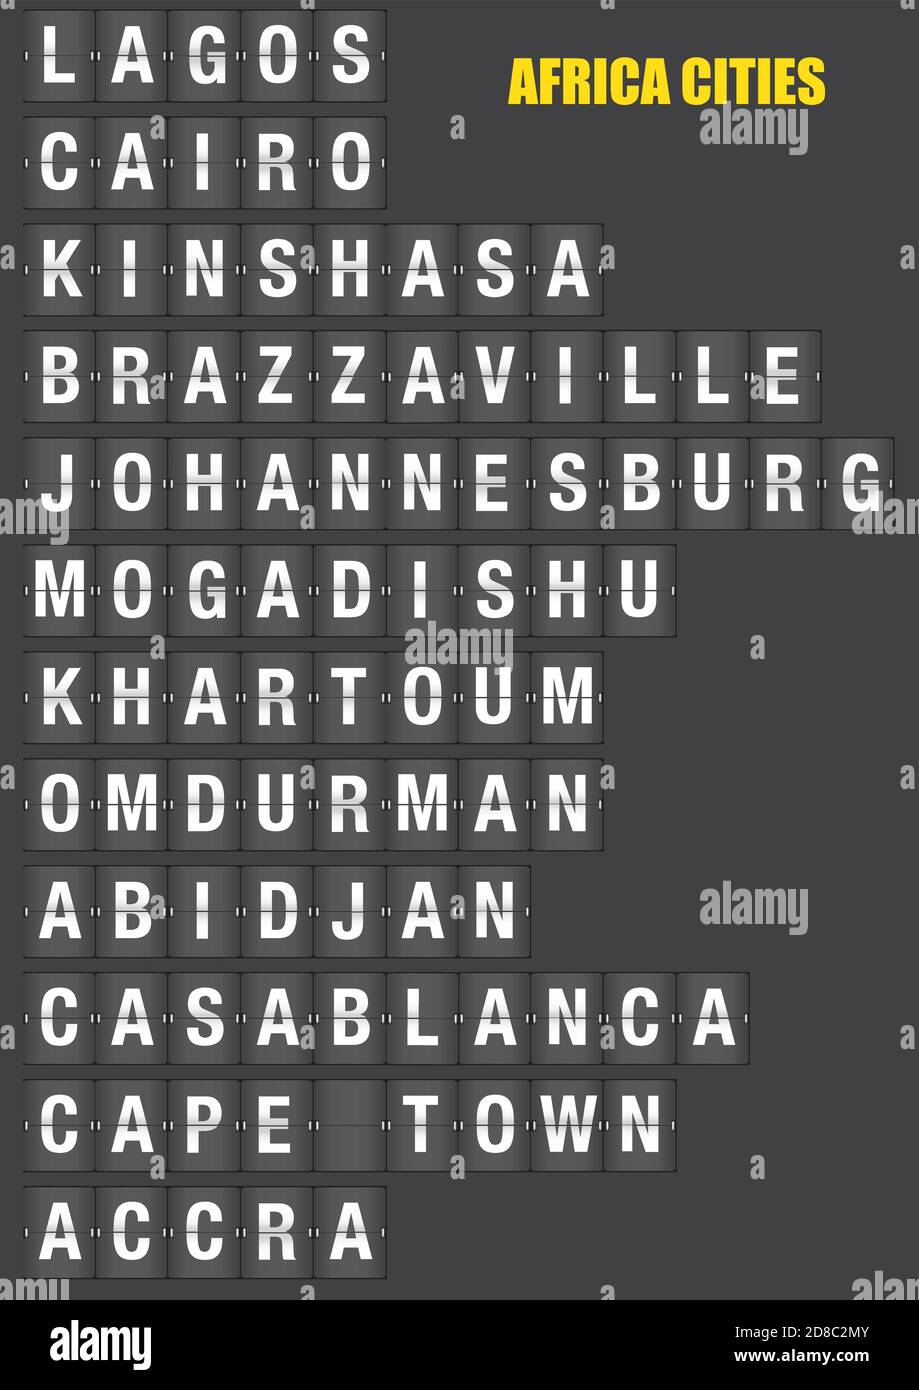 Names of African cities on old fashion split-flap display like travel destinations in airport flight information display system and railway stations t Stock Vector